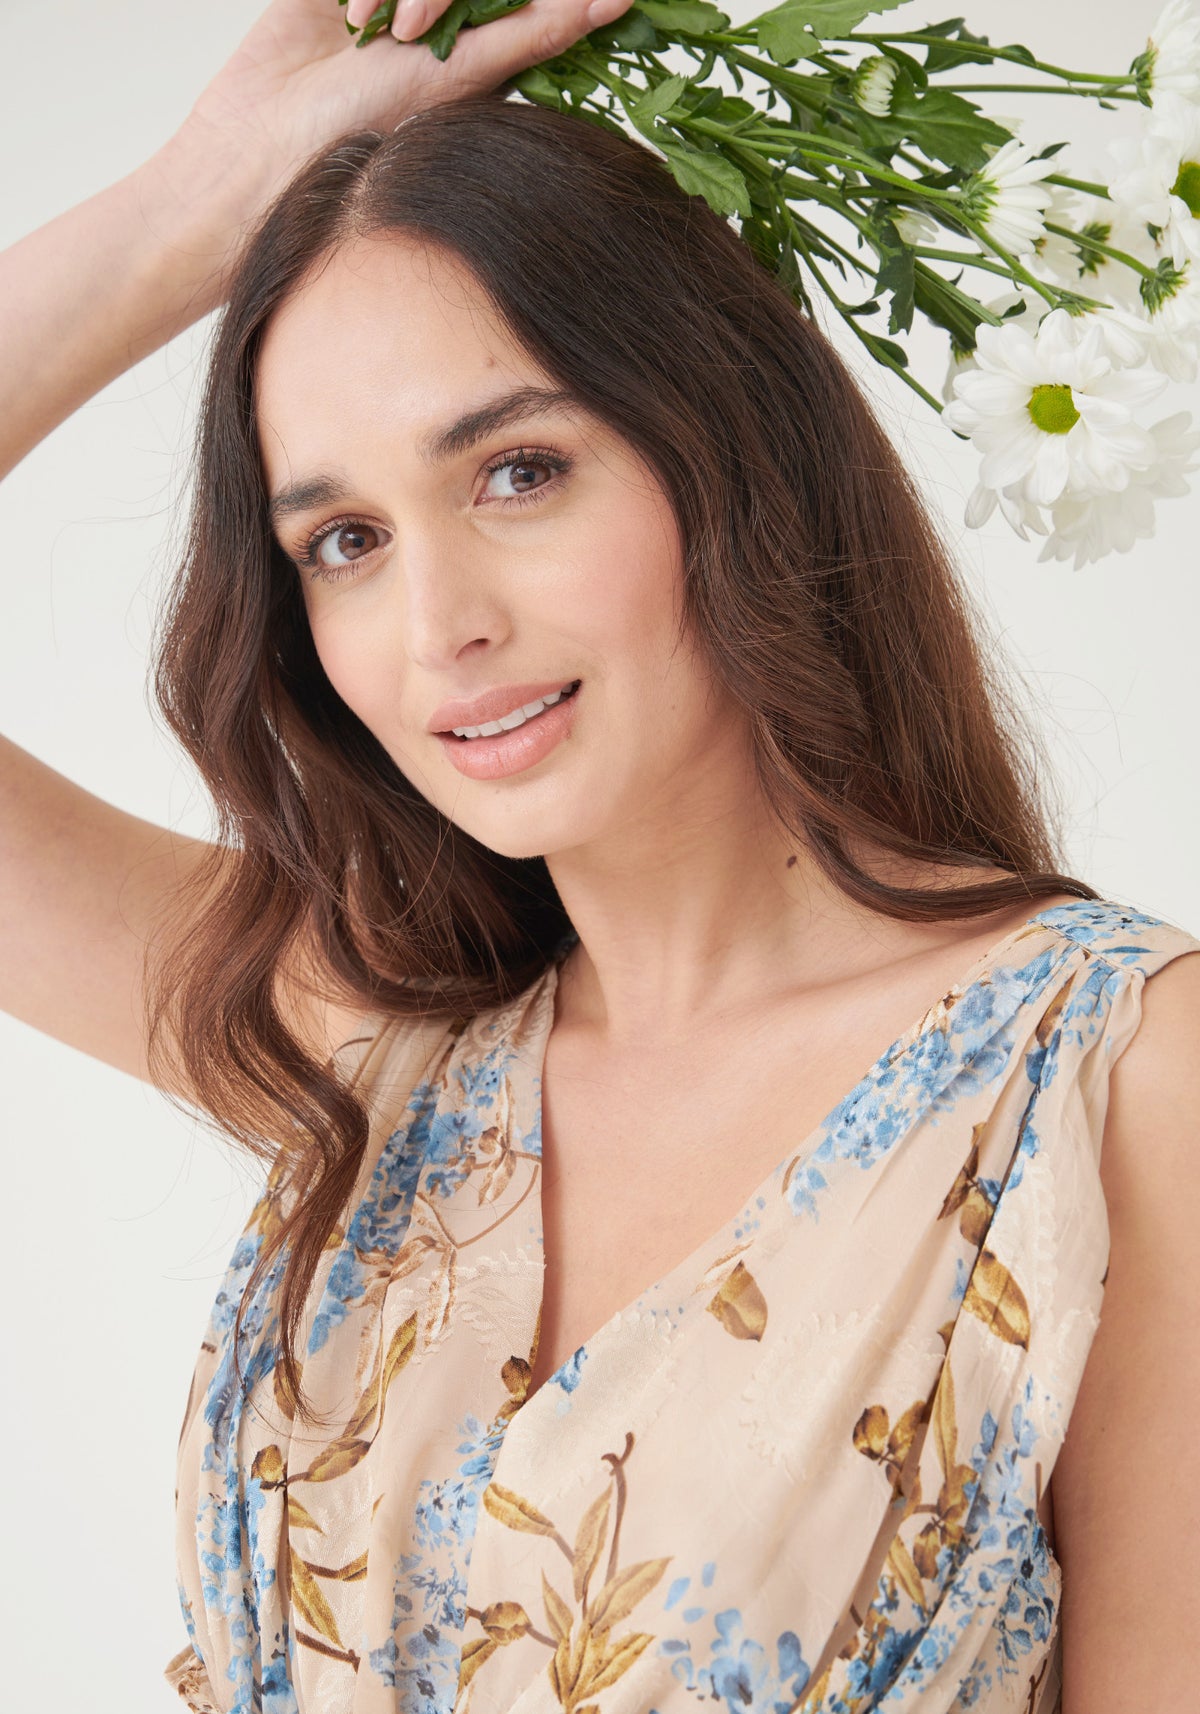 Miriam Tiered Midaxi Dress - Nude Blue Floral-Outlet